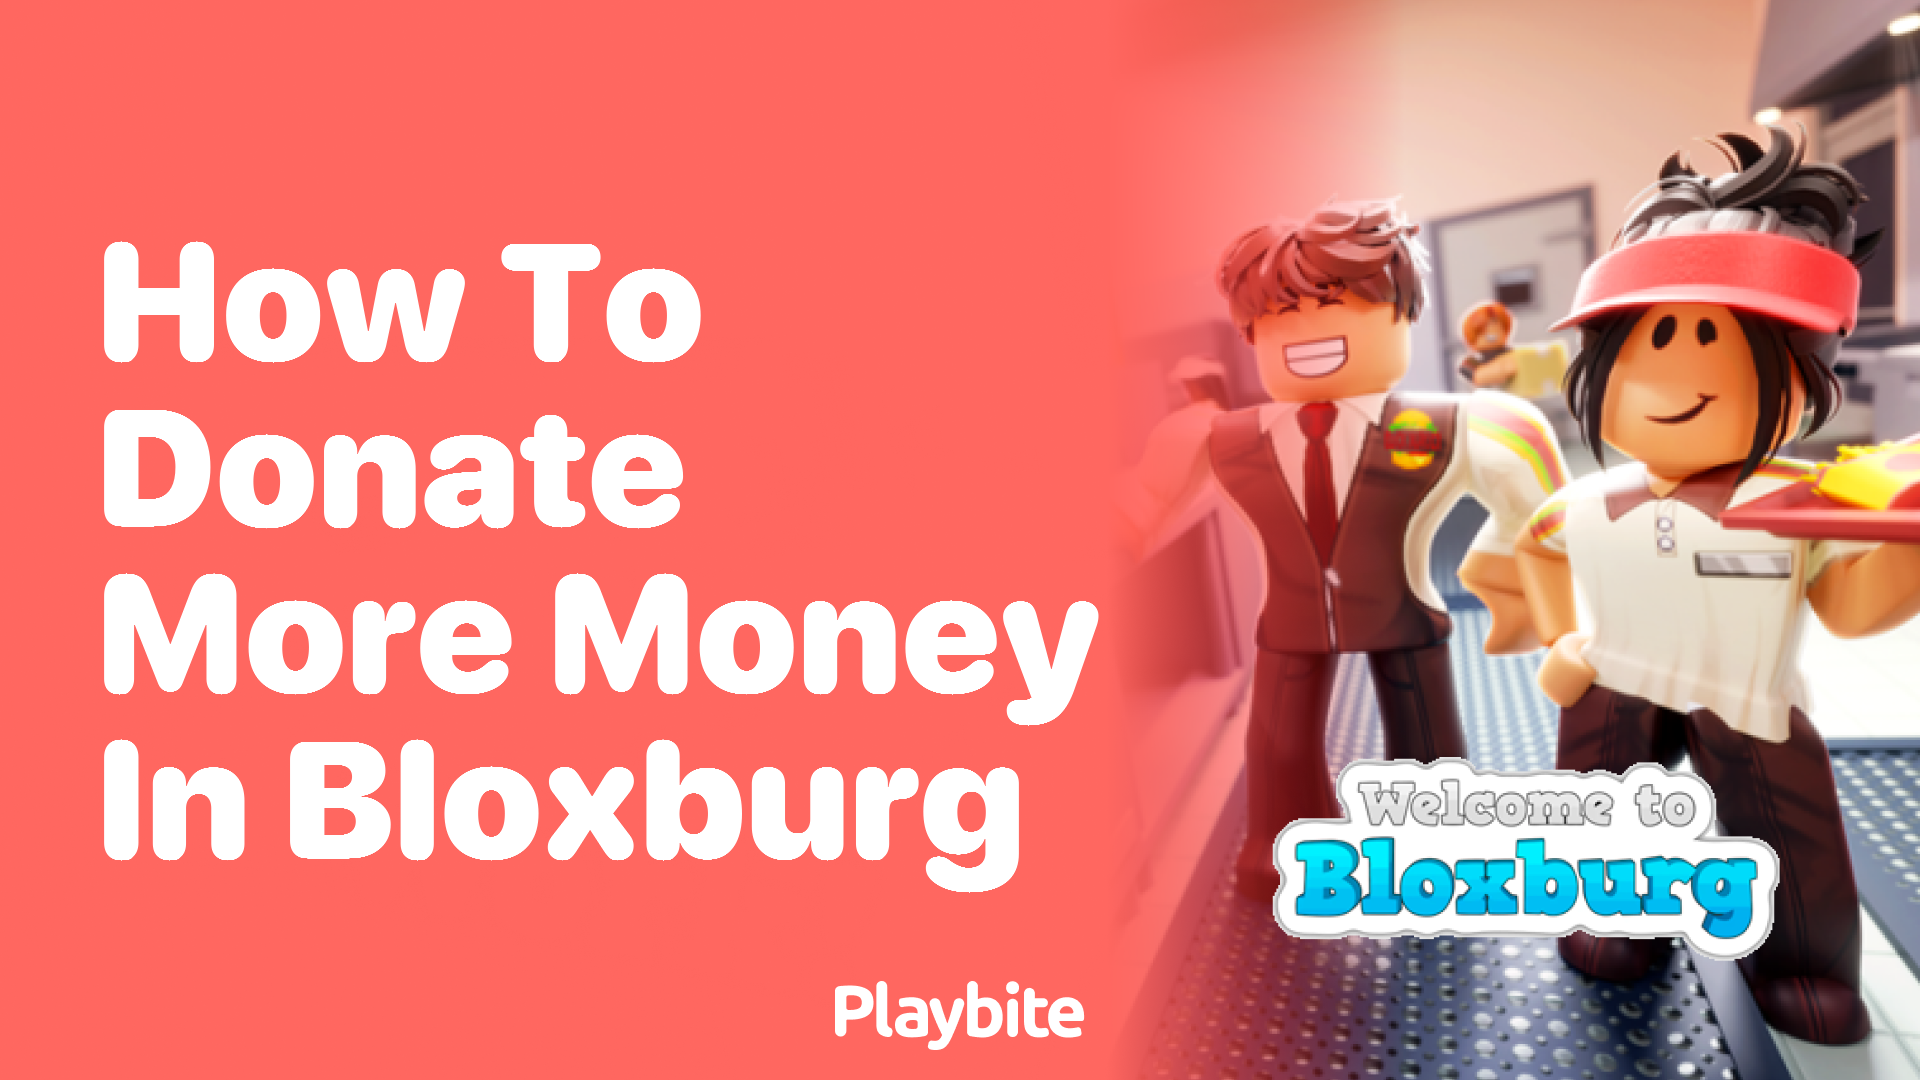 How to Donate More Money in Bloxburg: A Quick Guide